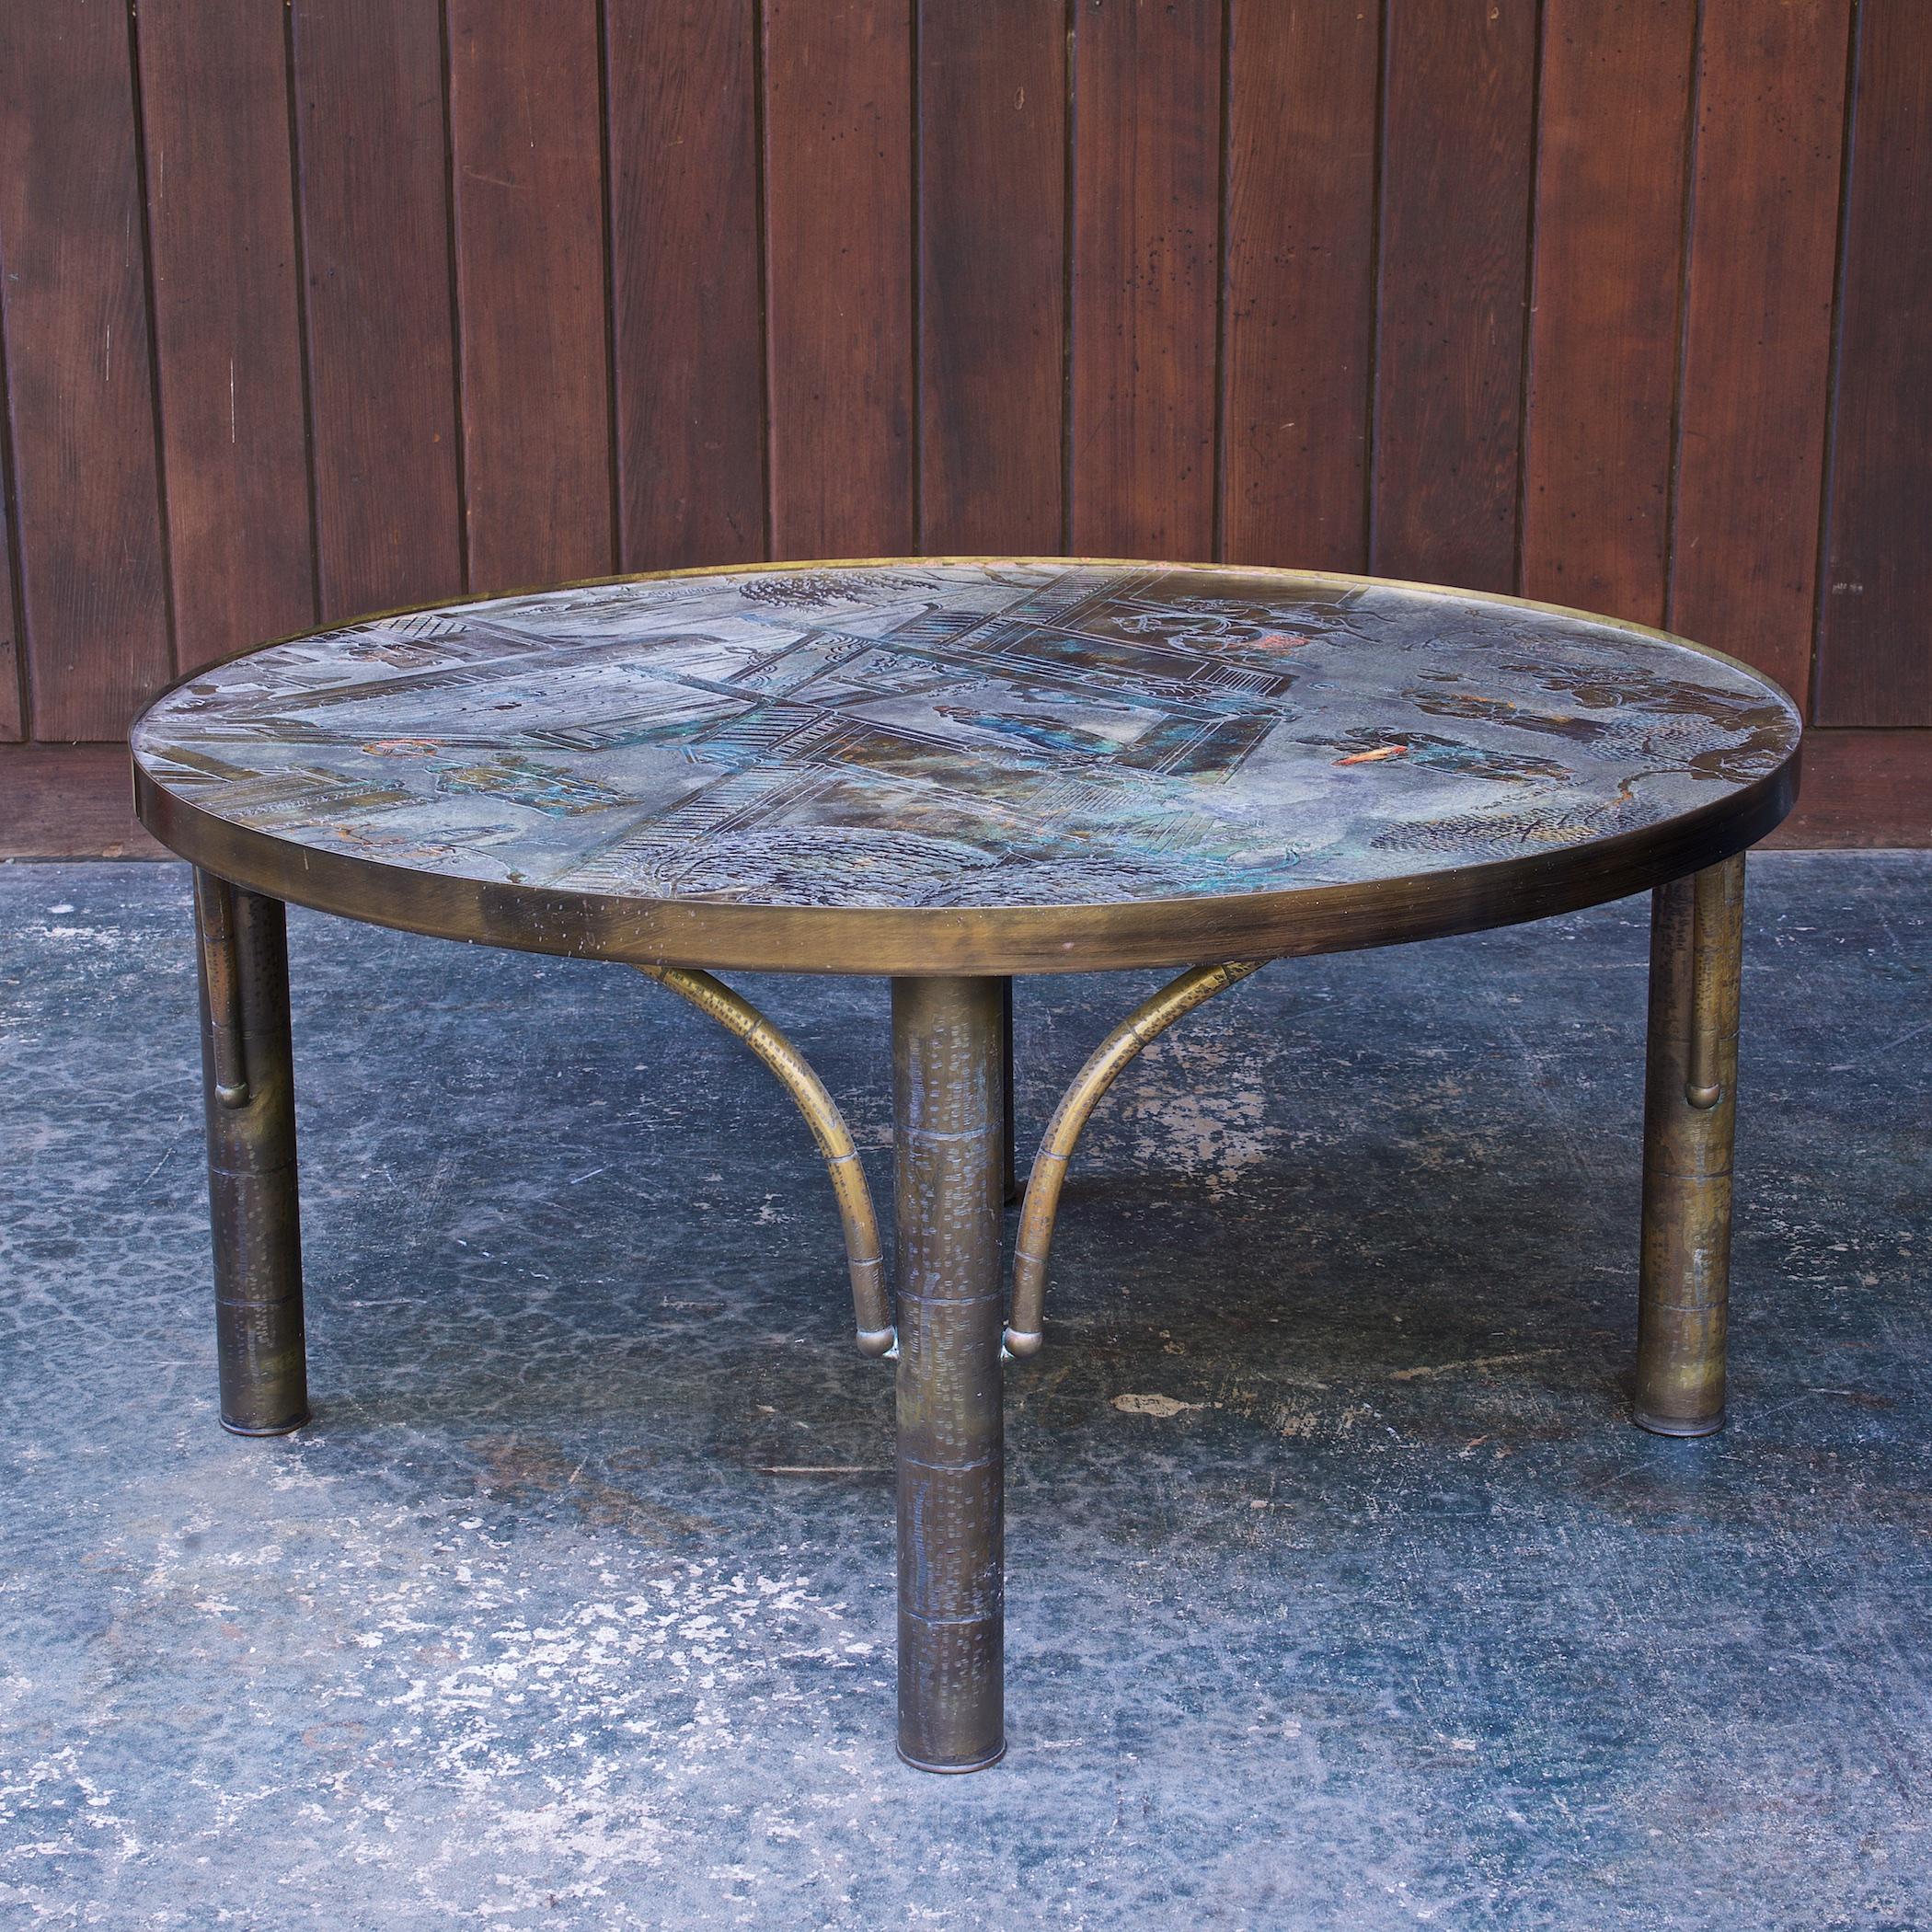 Wonderful uncommon 3 foot sized LaVerne Bronze Coffee Table with four faux bamboo metal legs.  A wonderful light catching textural bronze surface, changes in all light, with etched signature to top: Philip Kelvin LaVerne.